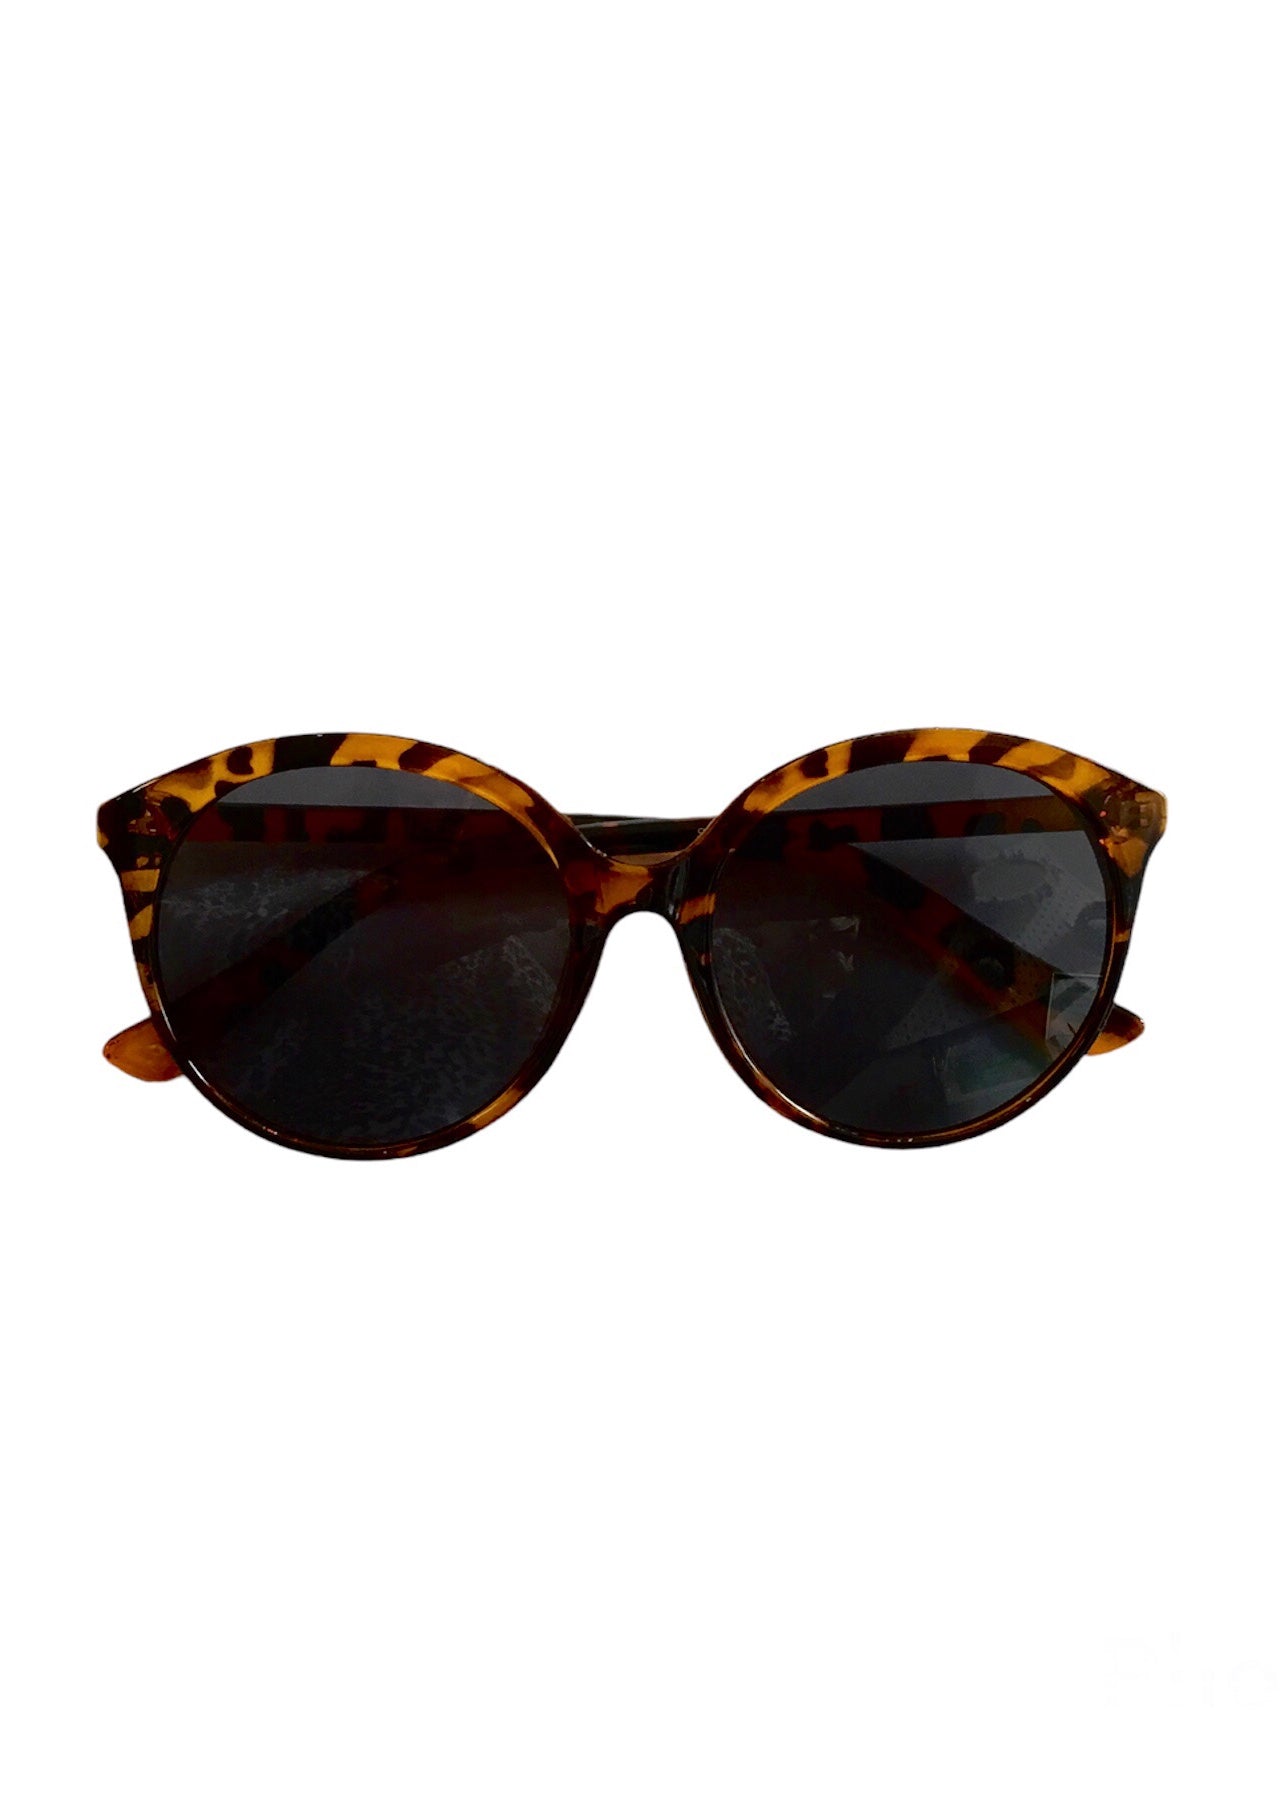 Soyaconcept - Danica Sunglases (6 styles)